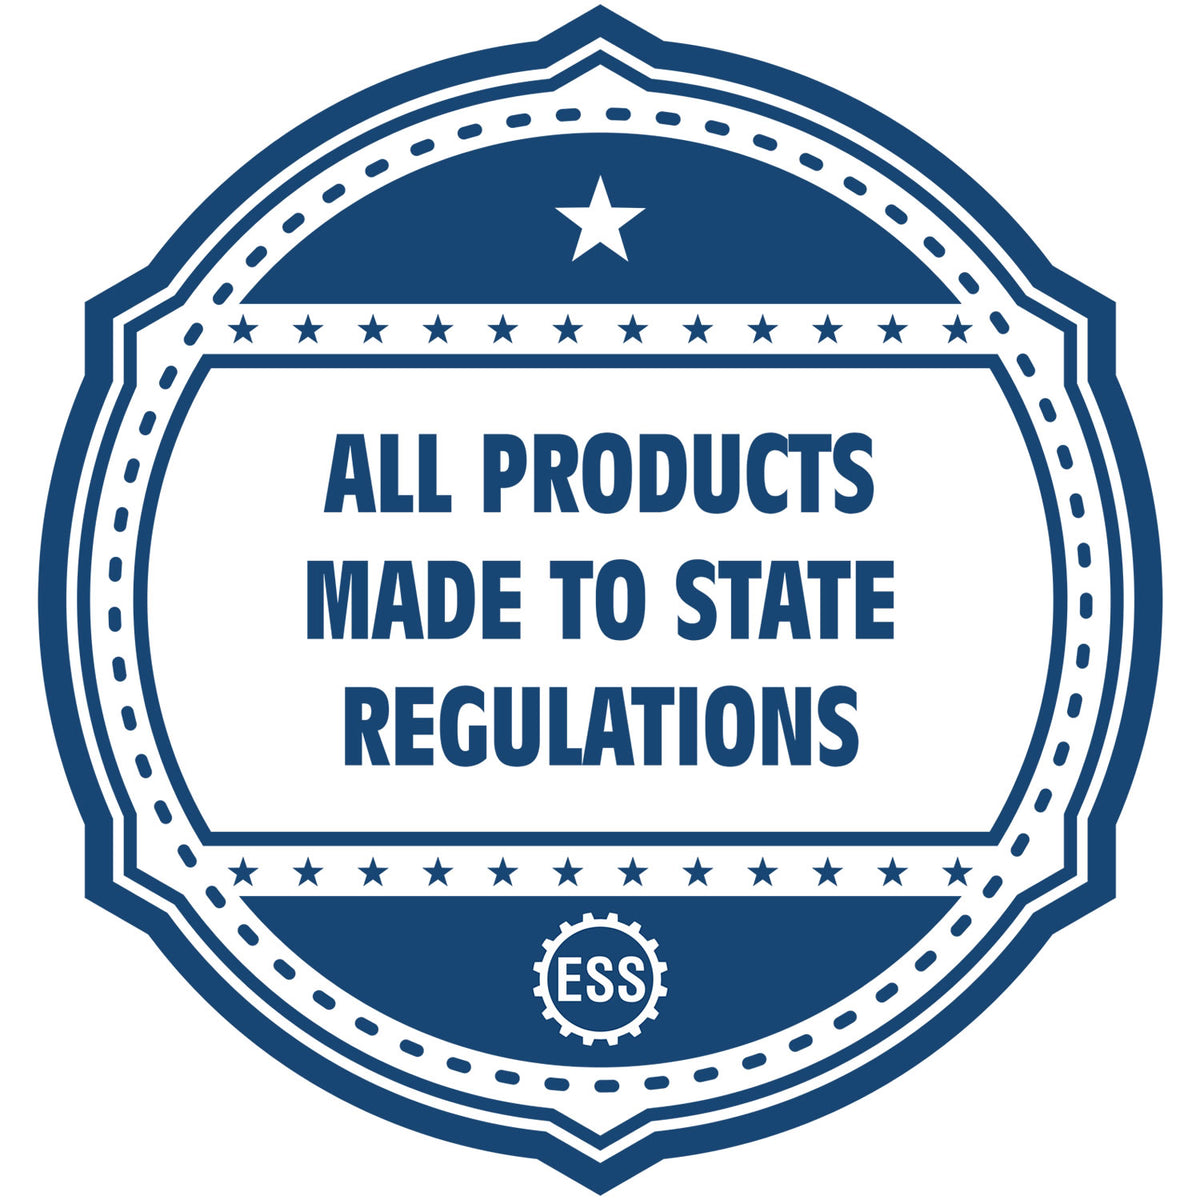 An icon or badge element for the Slim Pre-Inked California Professional Engineer Seal Stamp showing that this product is made in compliance with state regulations.